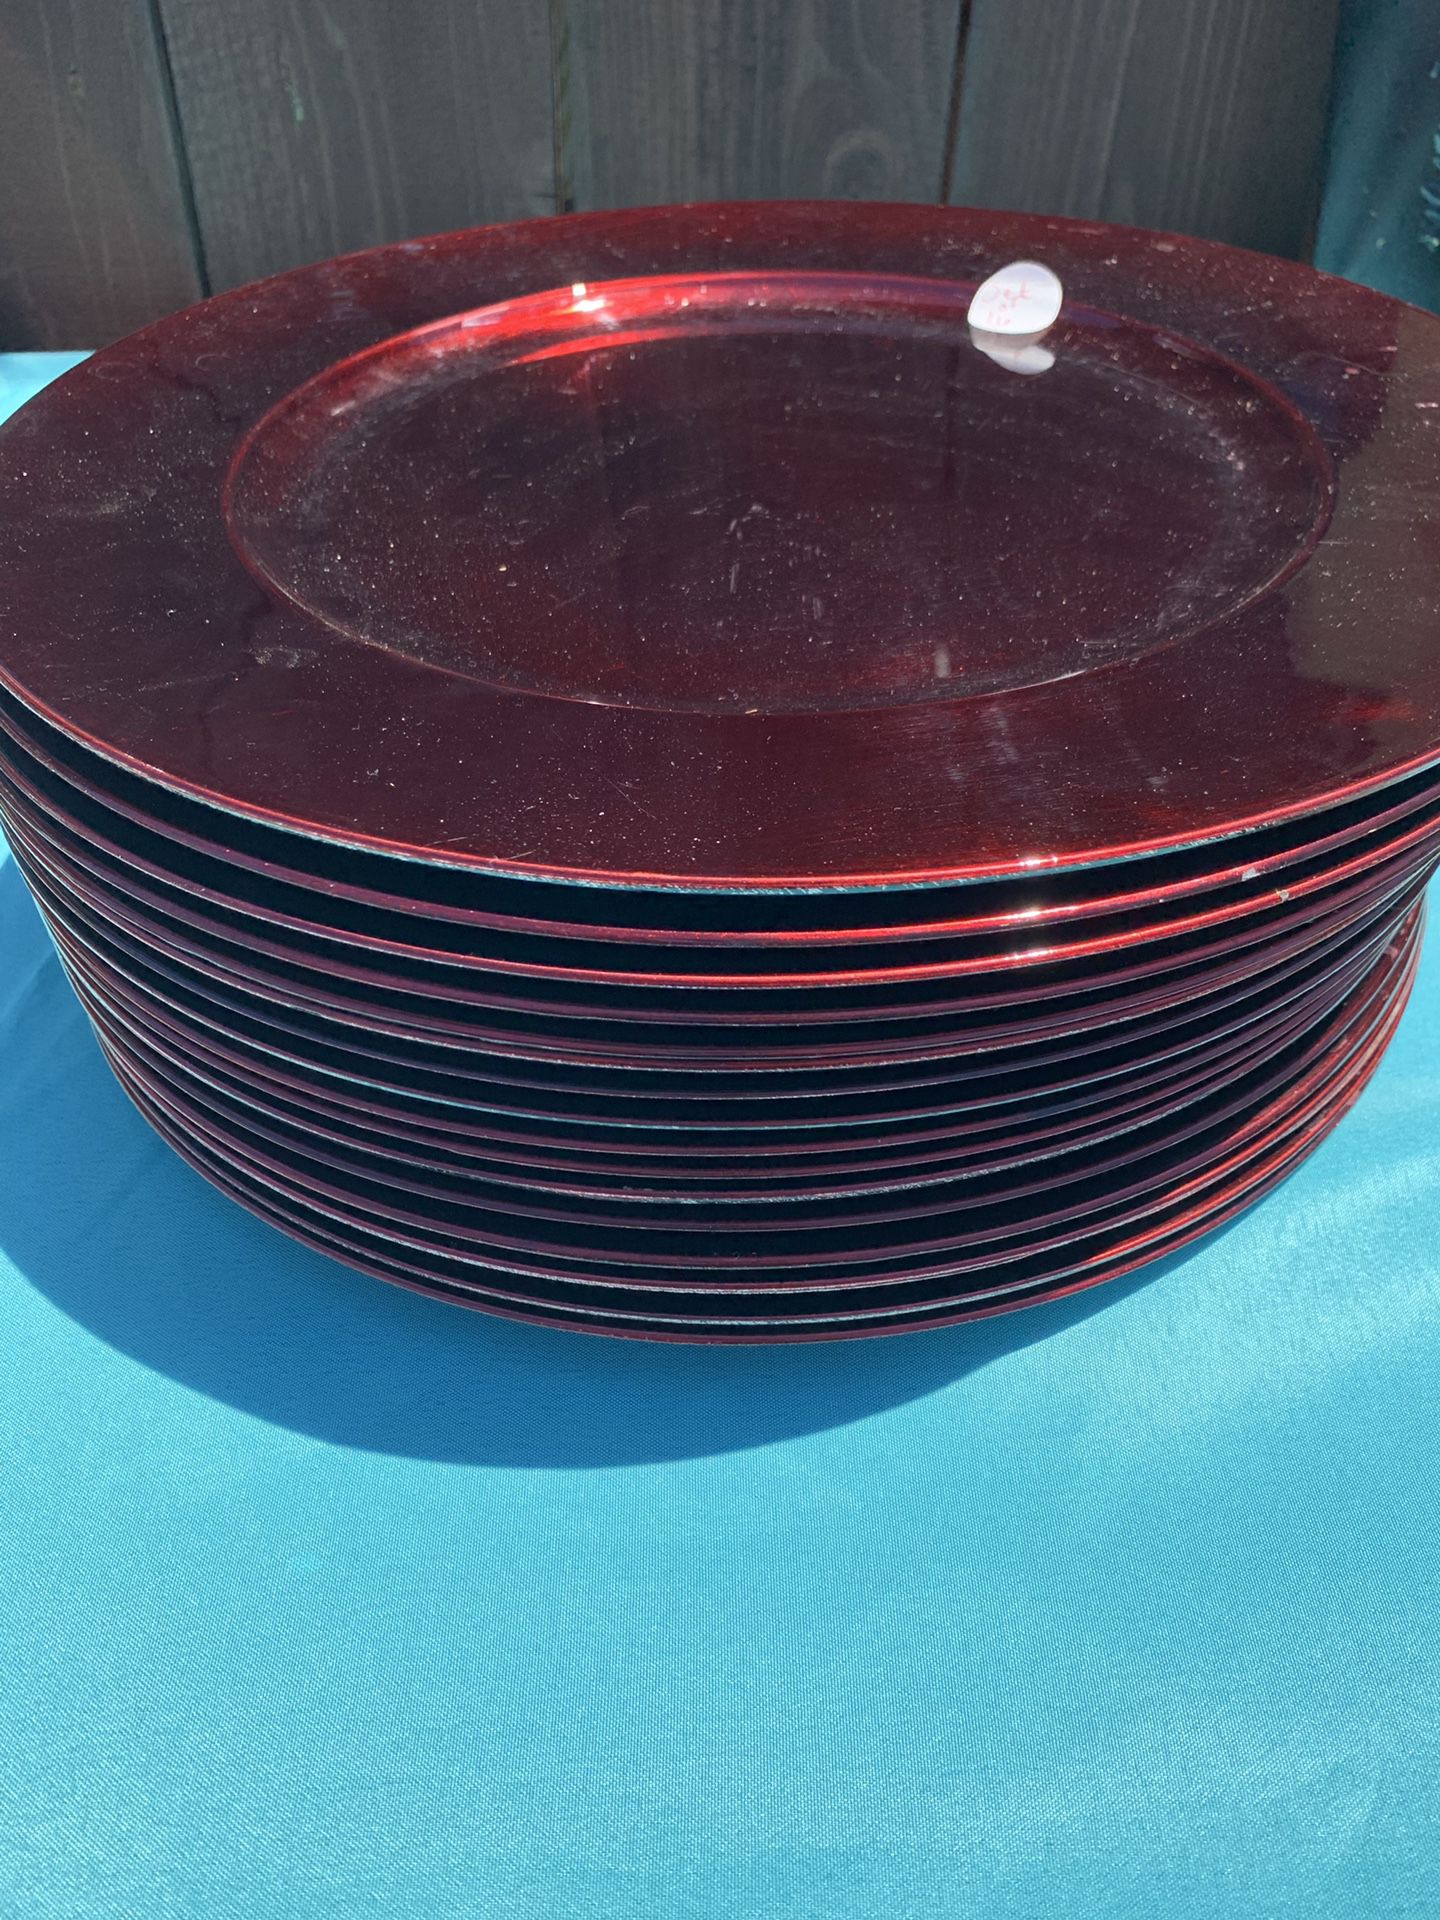 Red Charger Plates